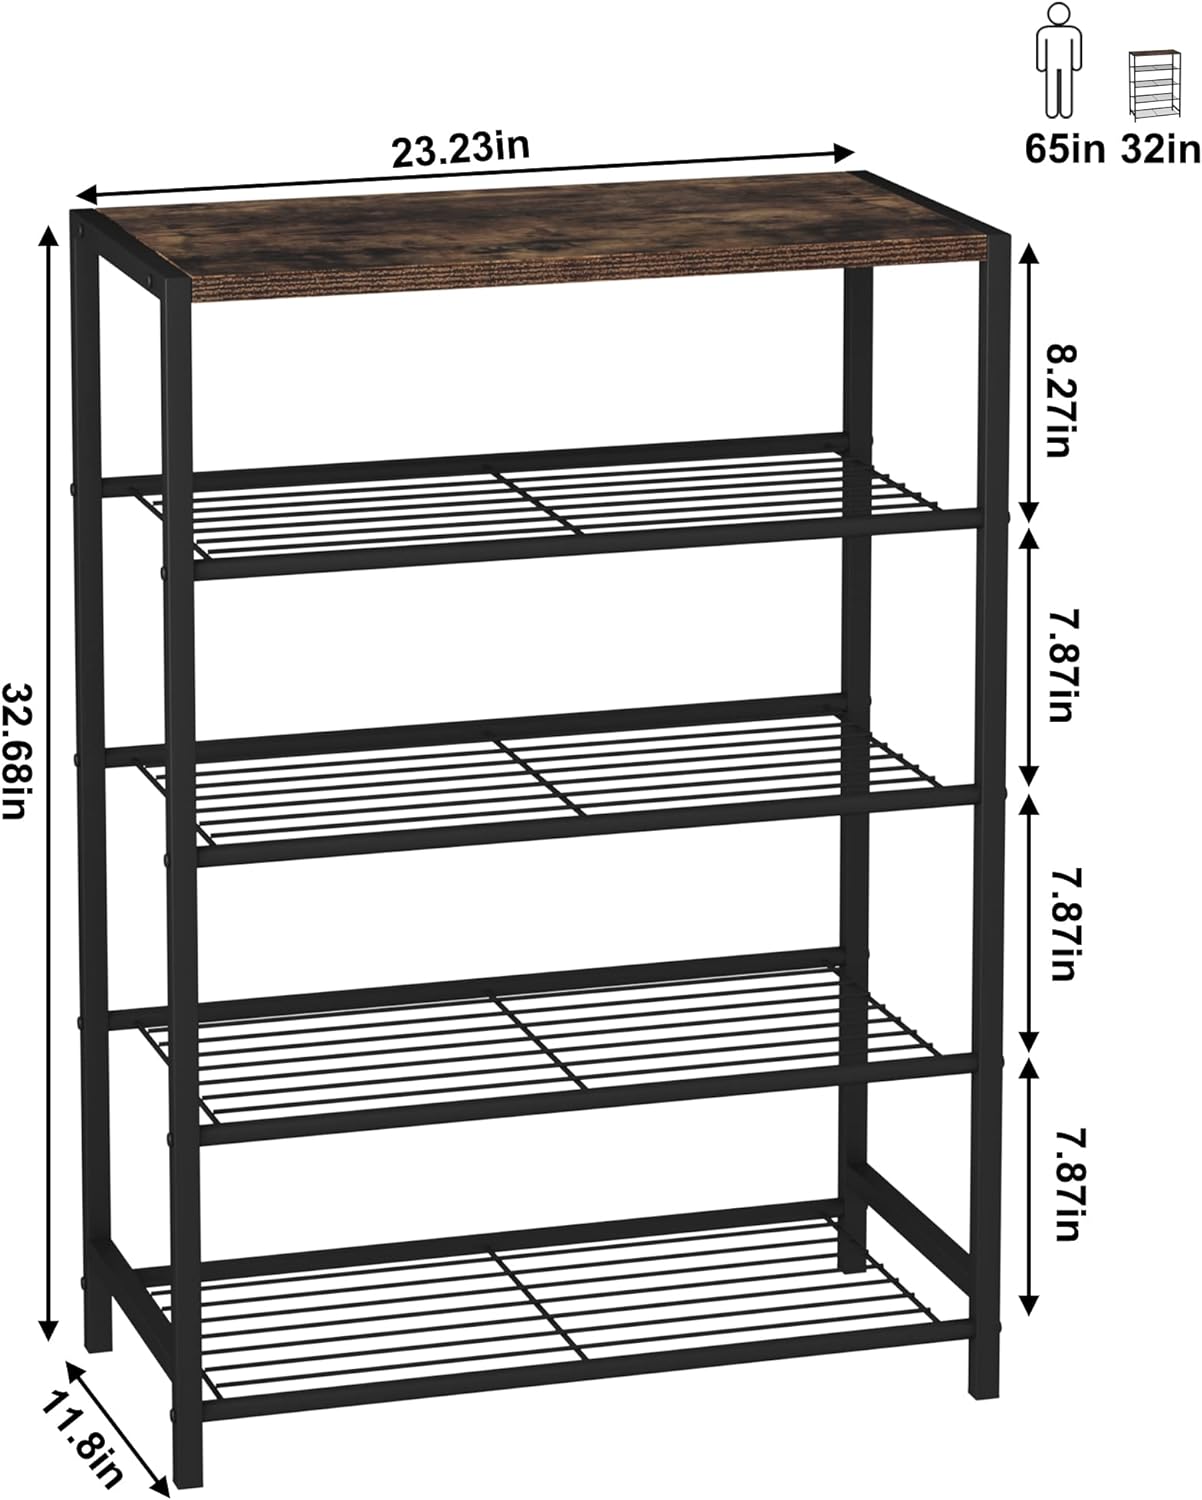 https://bigbigmart.com/wp-content/uploads/2023/12/HOMEFORT-5-Tier-Metal-Shoe-Rack-All-Metal-Shoe-Tower-Shoe-Storage-Shelf-with-MDF-Top-Board-Each-Tier-Fits-3-Pairs-of-Shoes-Entryway-Shoes-Organizer-with-Sturdy-Metal-Shelves-in-Rustic-Brown2.jpg